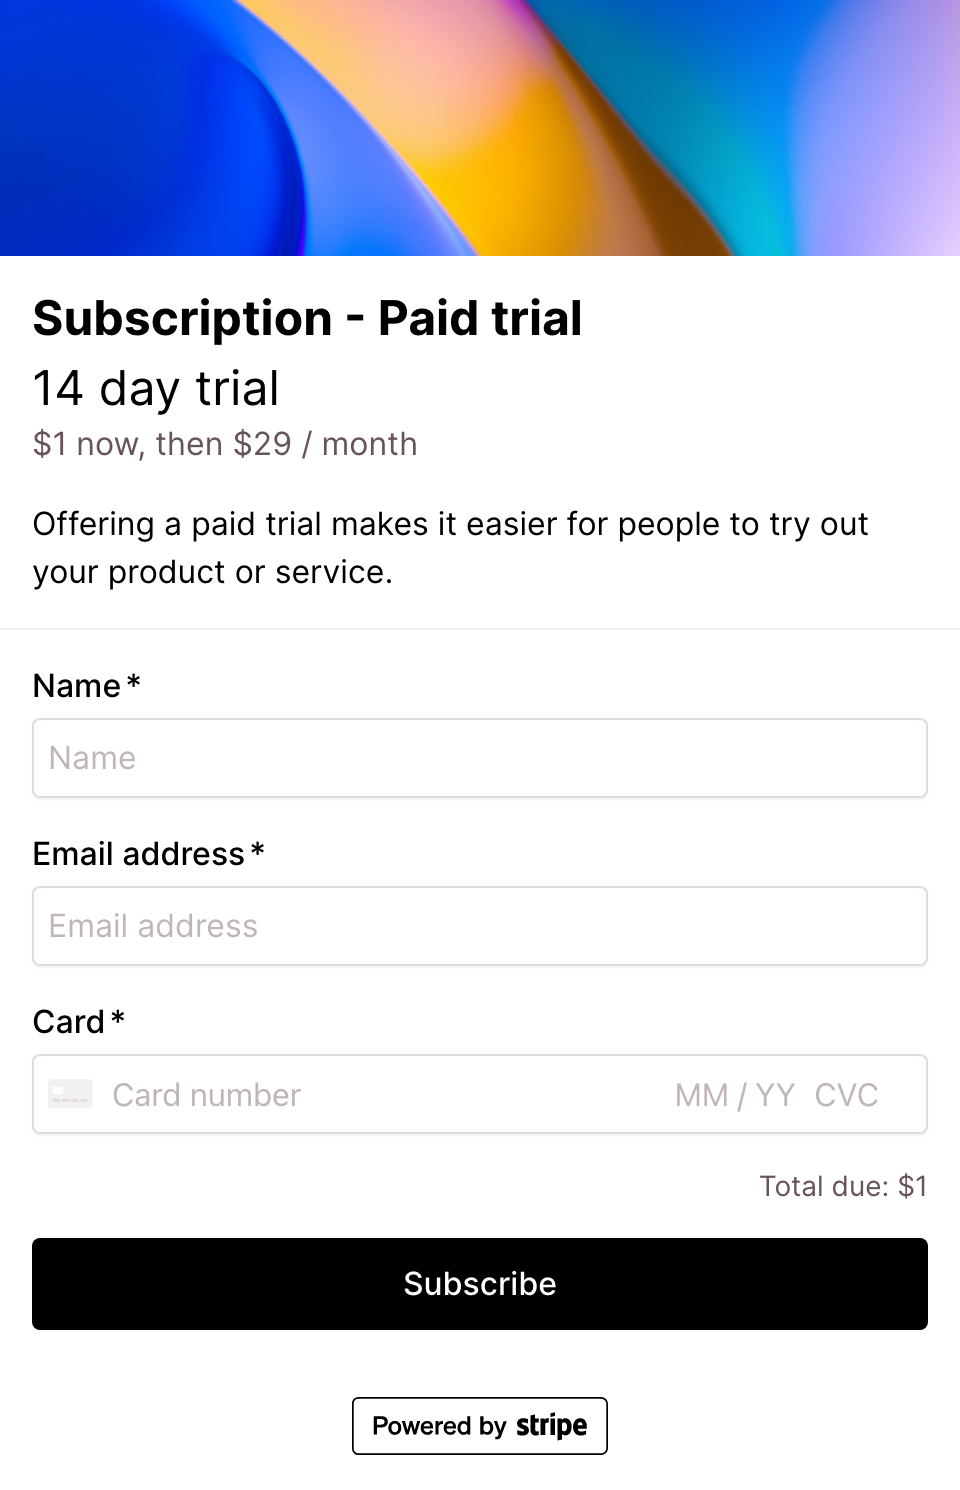 Paid trial subscription